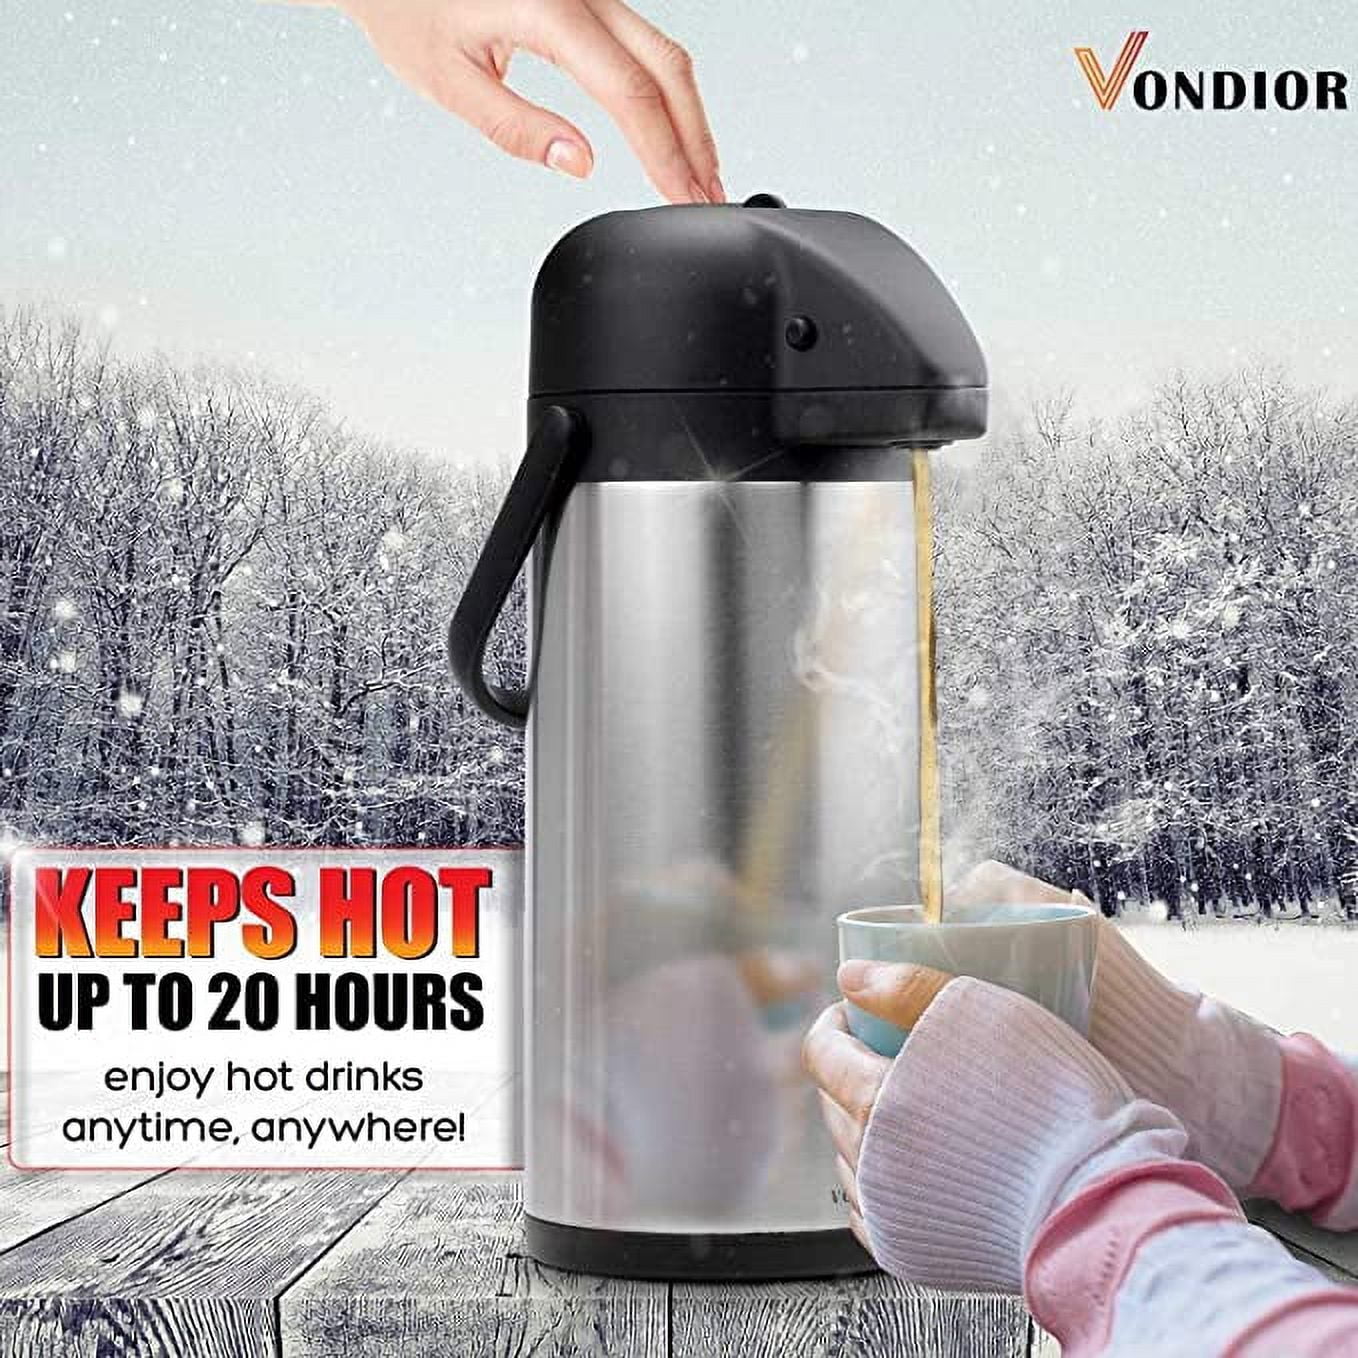  Soopot Thermal Coffee Carafe, 68Oz Coffee Dispenser, Airpot  Coffee Dispenser with Pump,Stainless Steel Insulated Flask 12-14 Hours Heat  Retention 12 Hours Cold Retention: Home & Kitchen